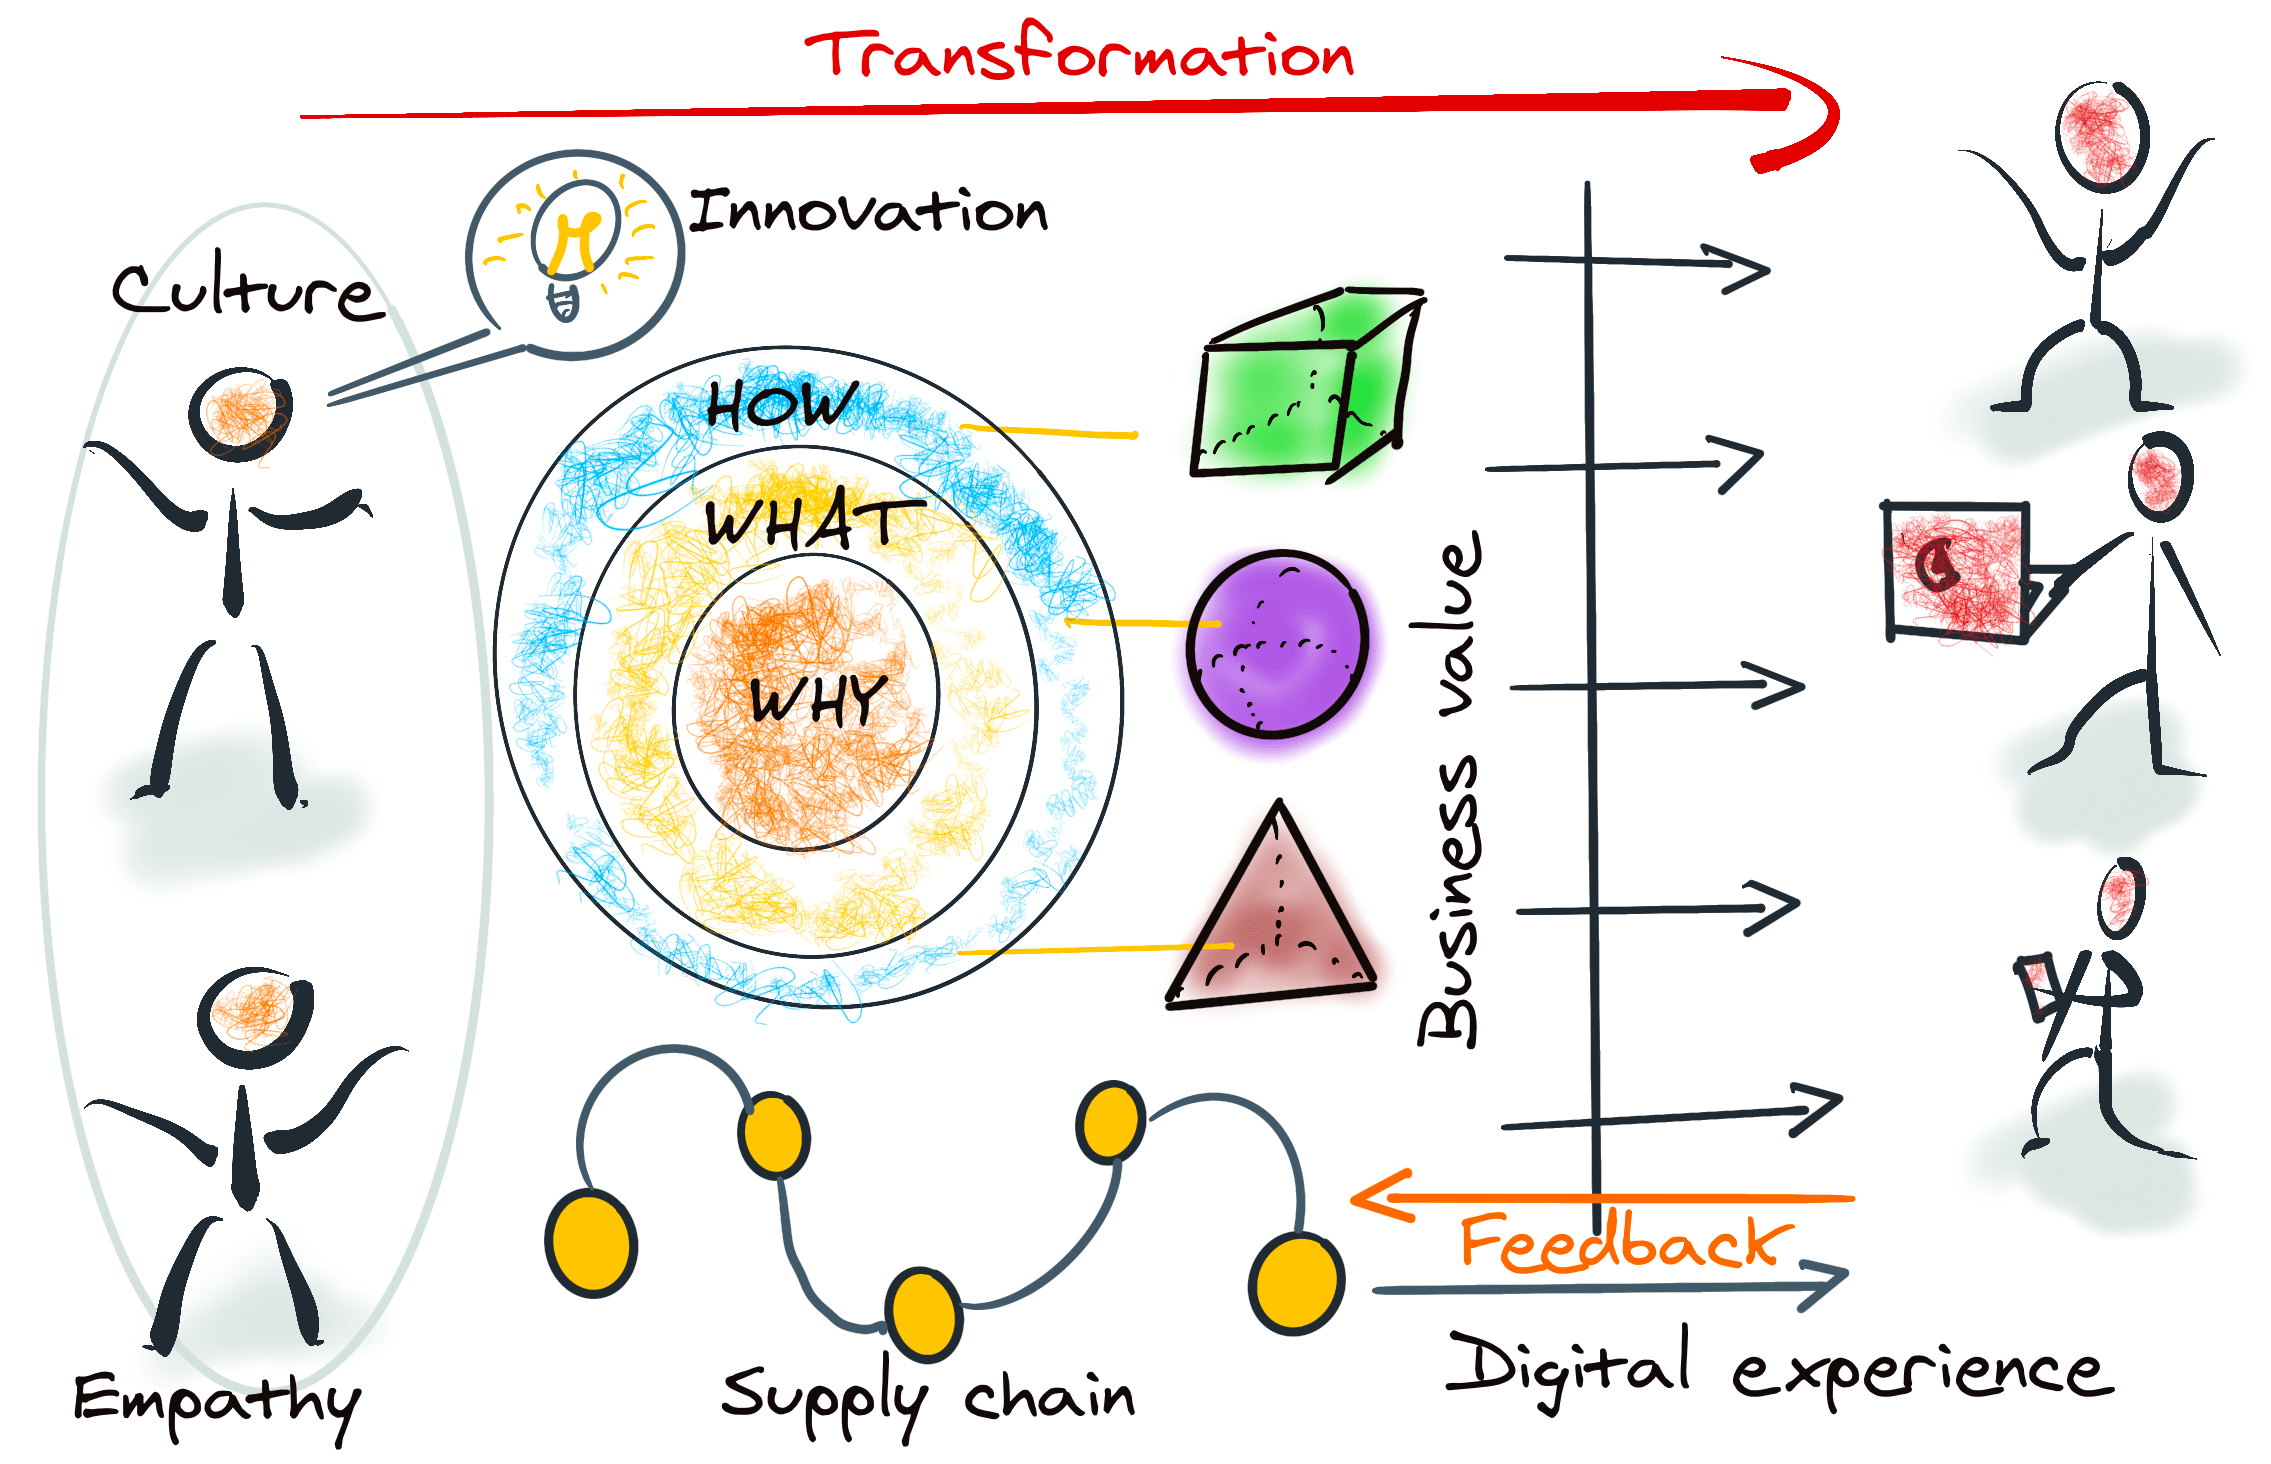 Rethink and Reimagine for a Successful Digital Transformation